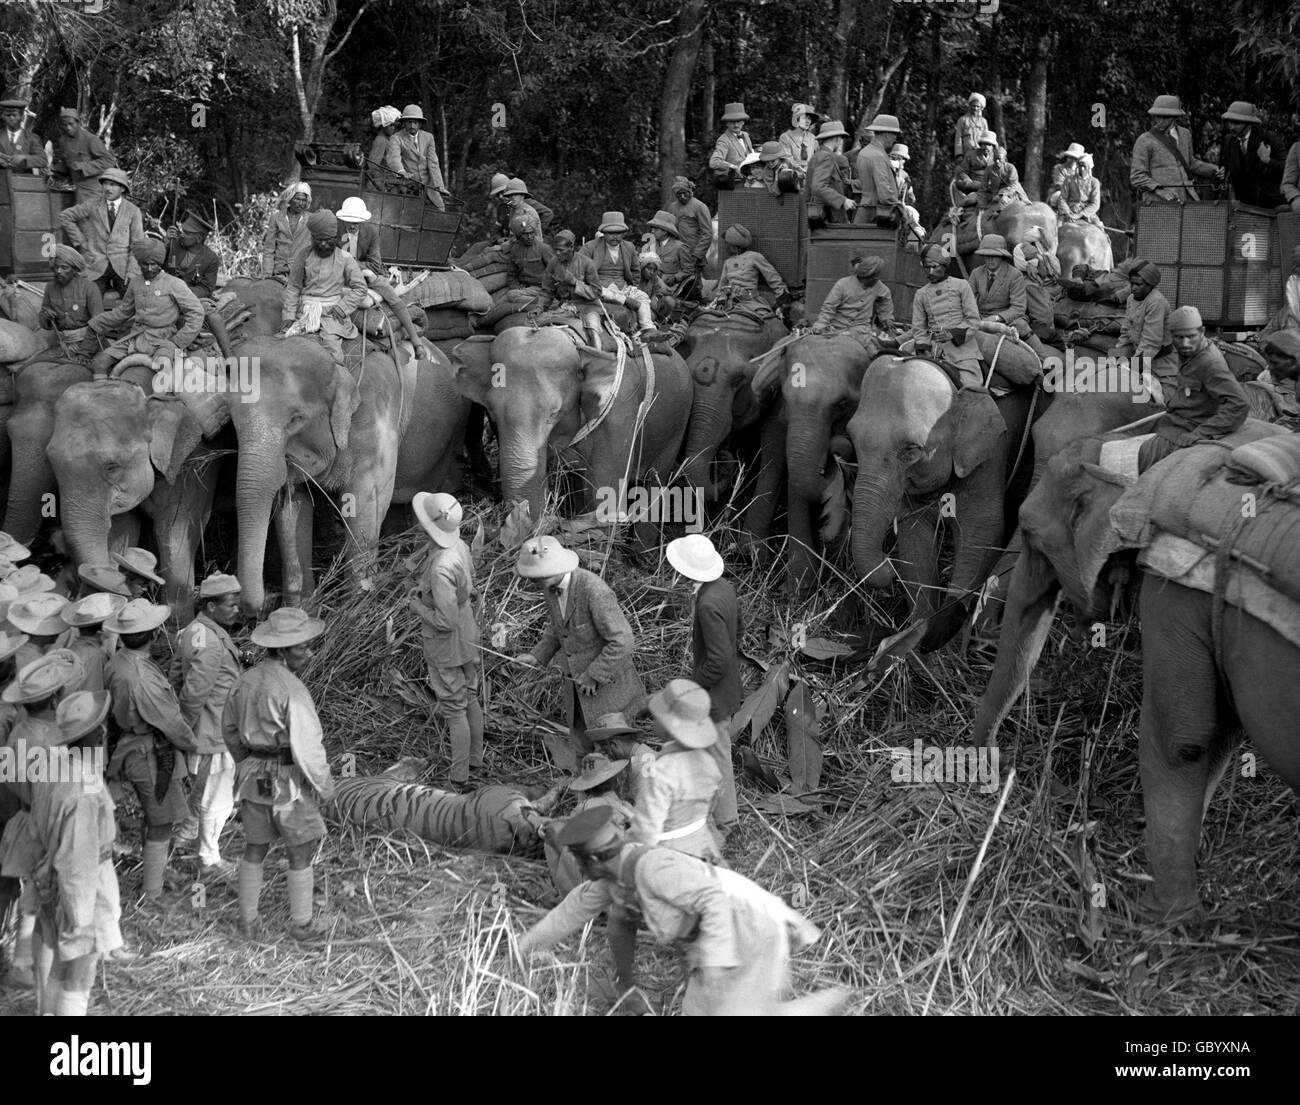 Royalty - Prince of Wales India Tour - 1921 Stock Photo